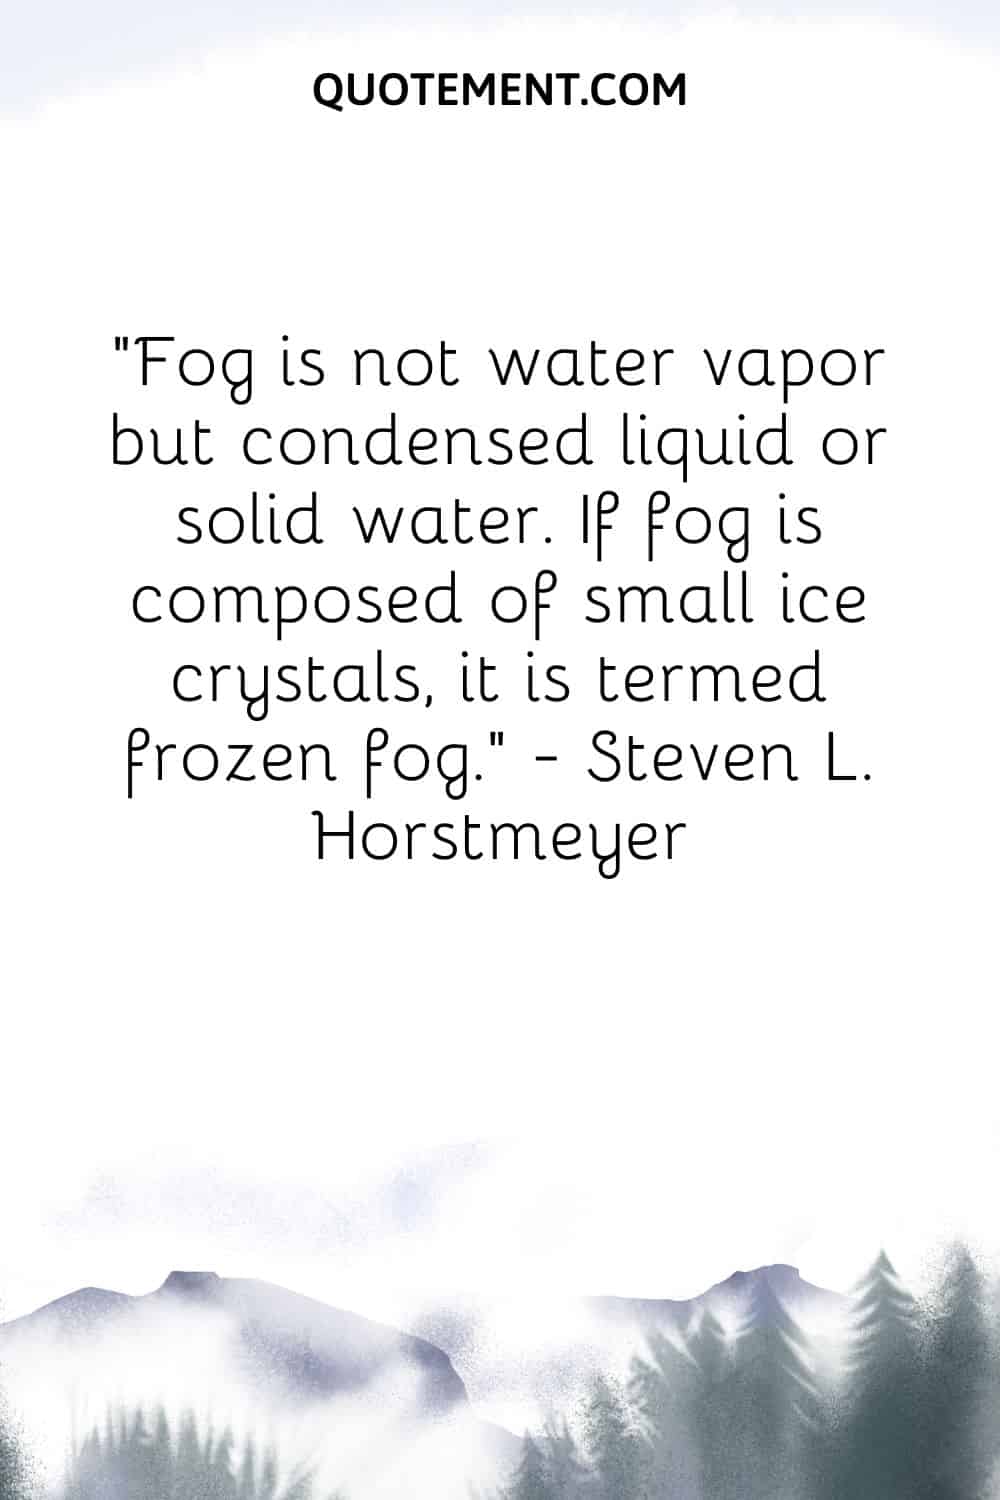 Fog is not water vapor but condensed liquid or solid water